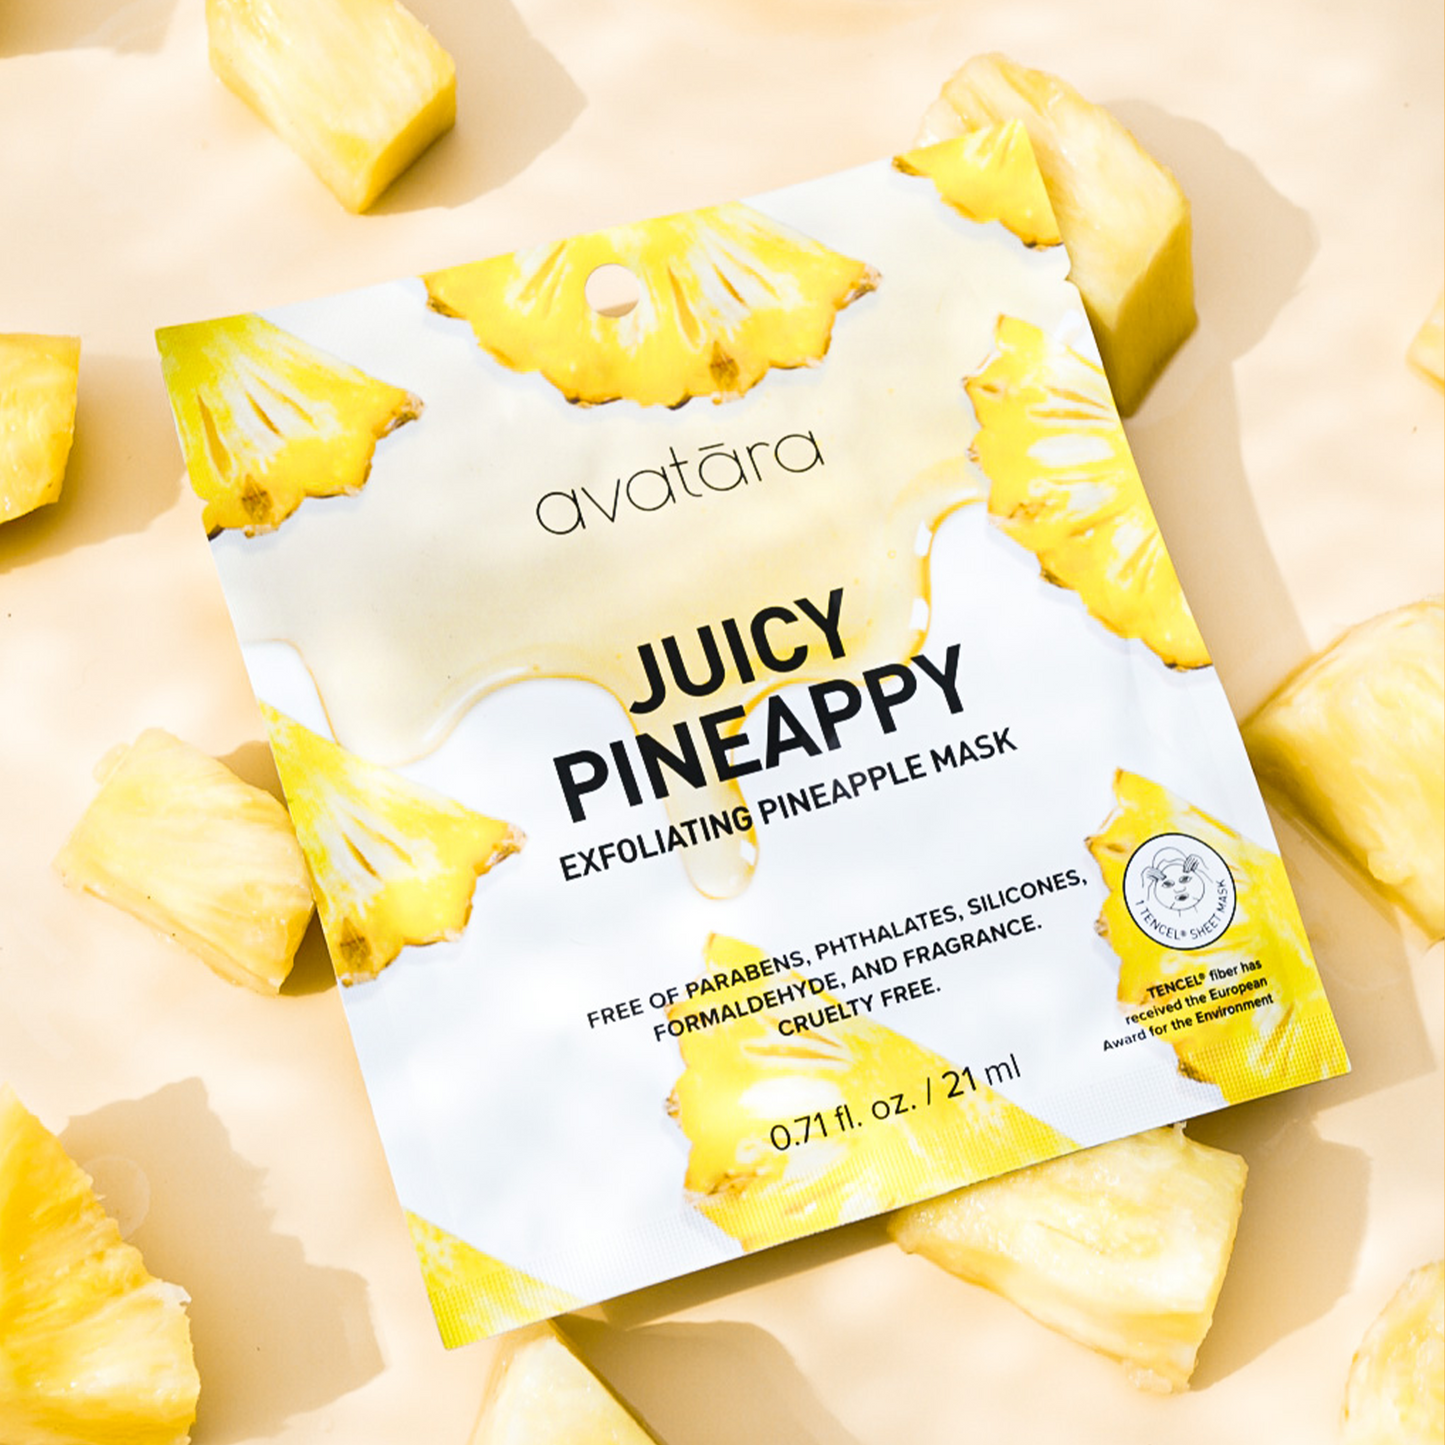 Pineappy Exfoliating Face Mask